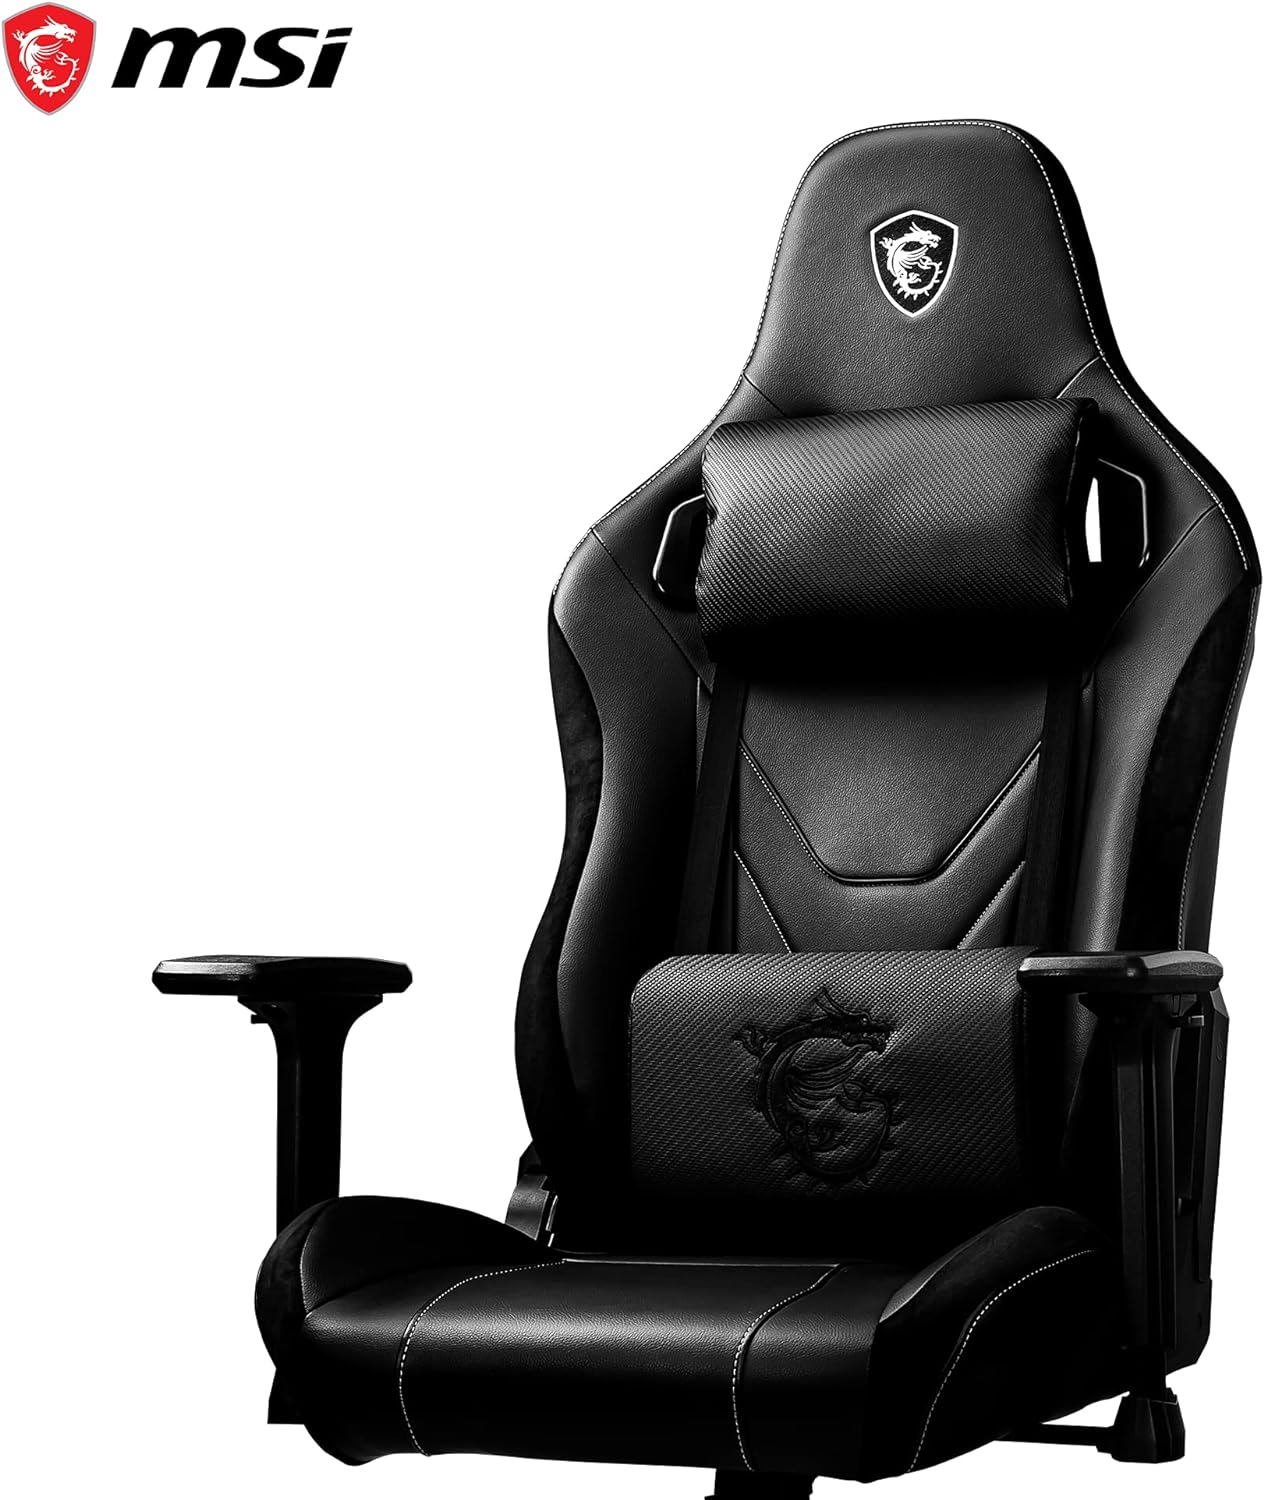 Comfortable MAG CH130 X Gaming Chair - Soft velvet trim, adjustable lumbar & neck cushions, suitable for long hours of use. 4719072795443